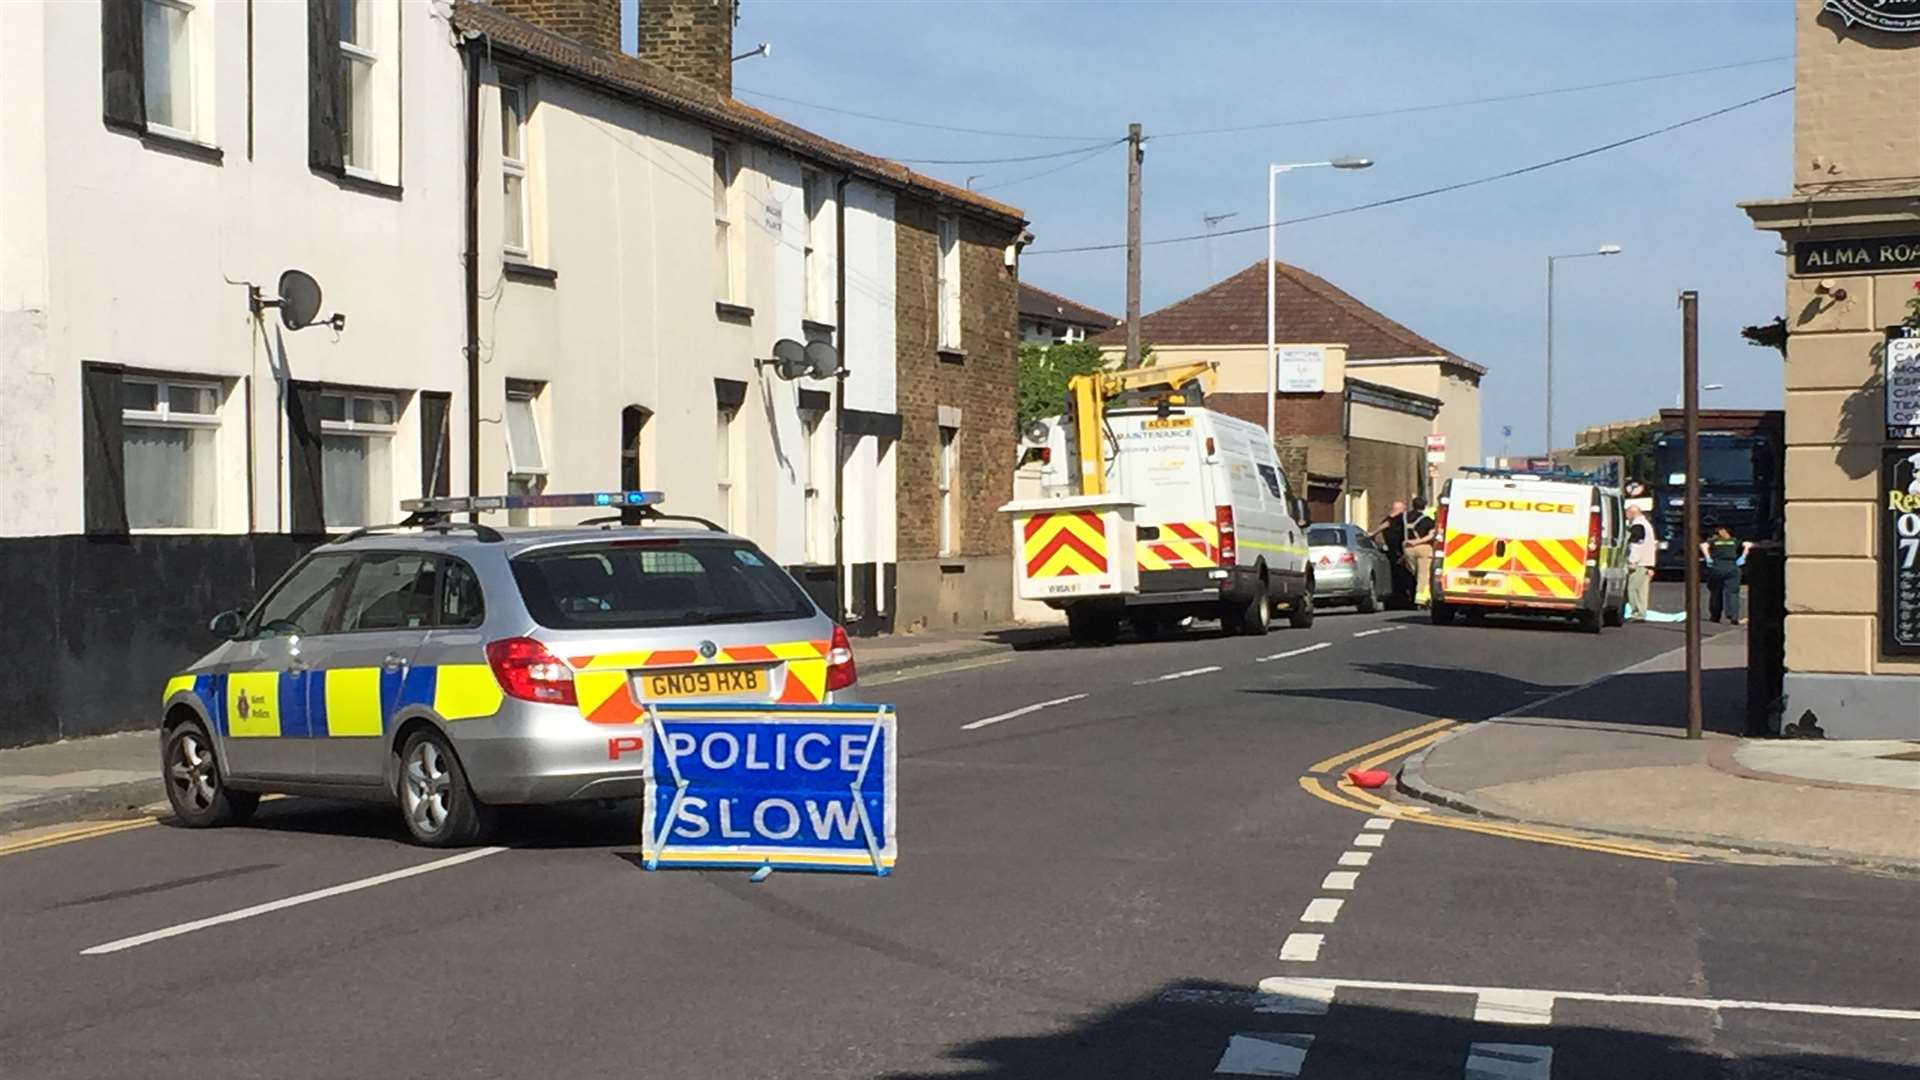 The scene of the crash in Marine Parade, Sheerness